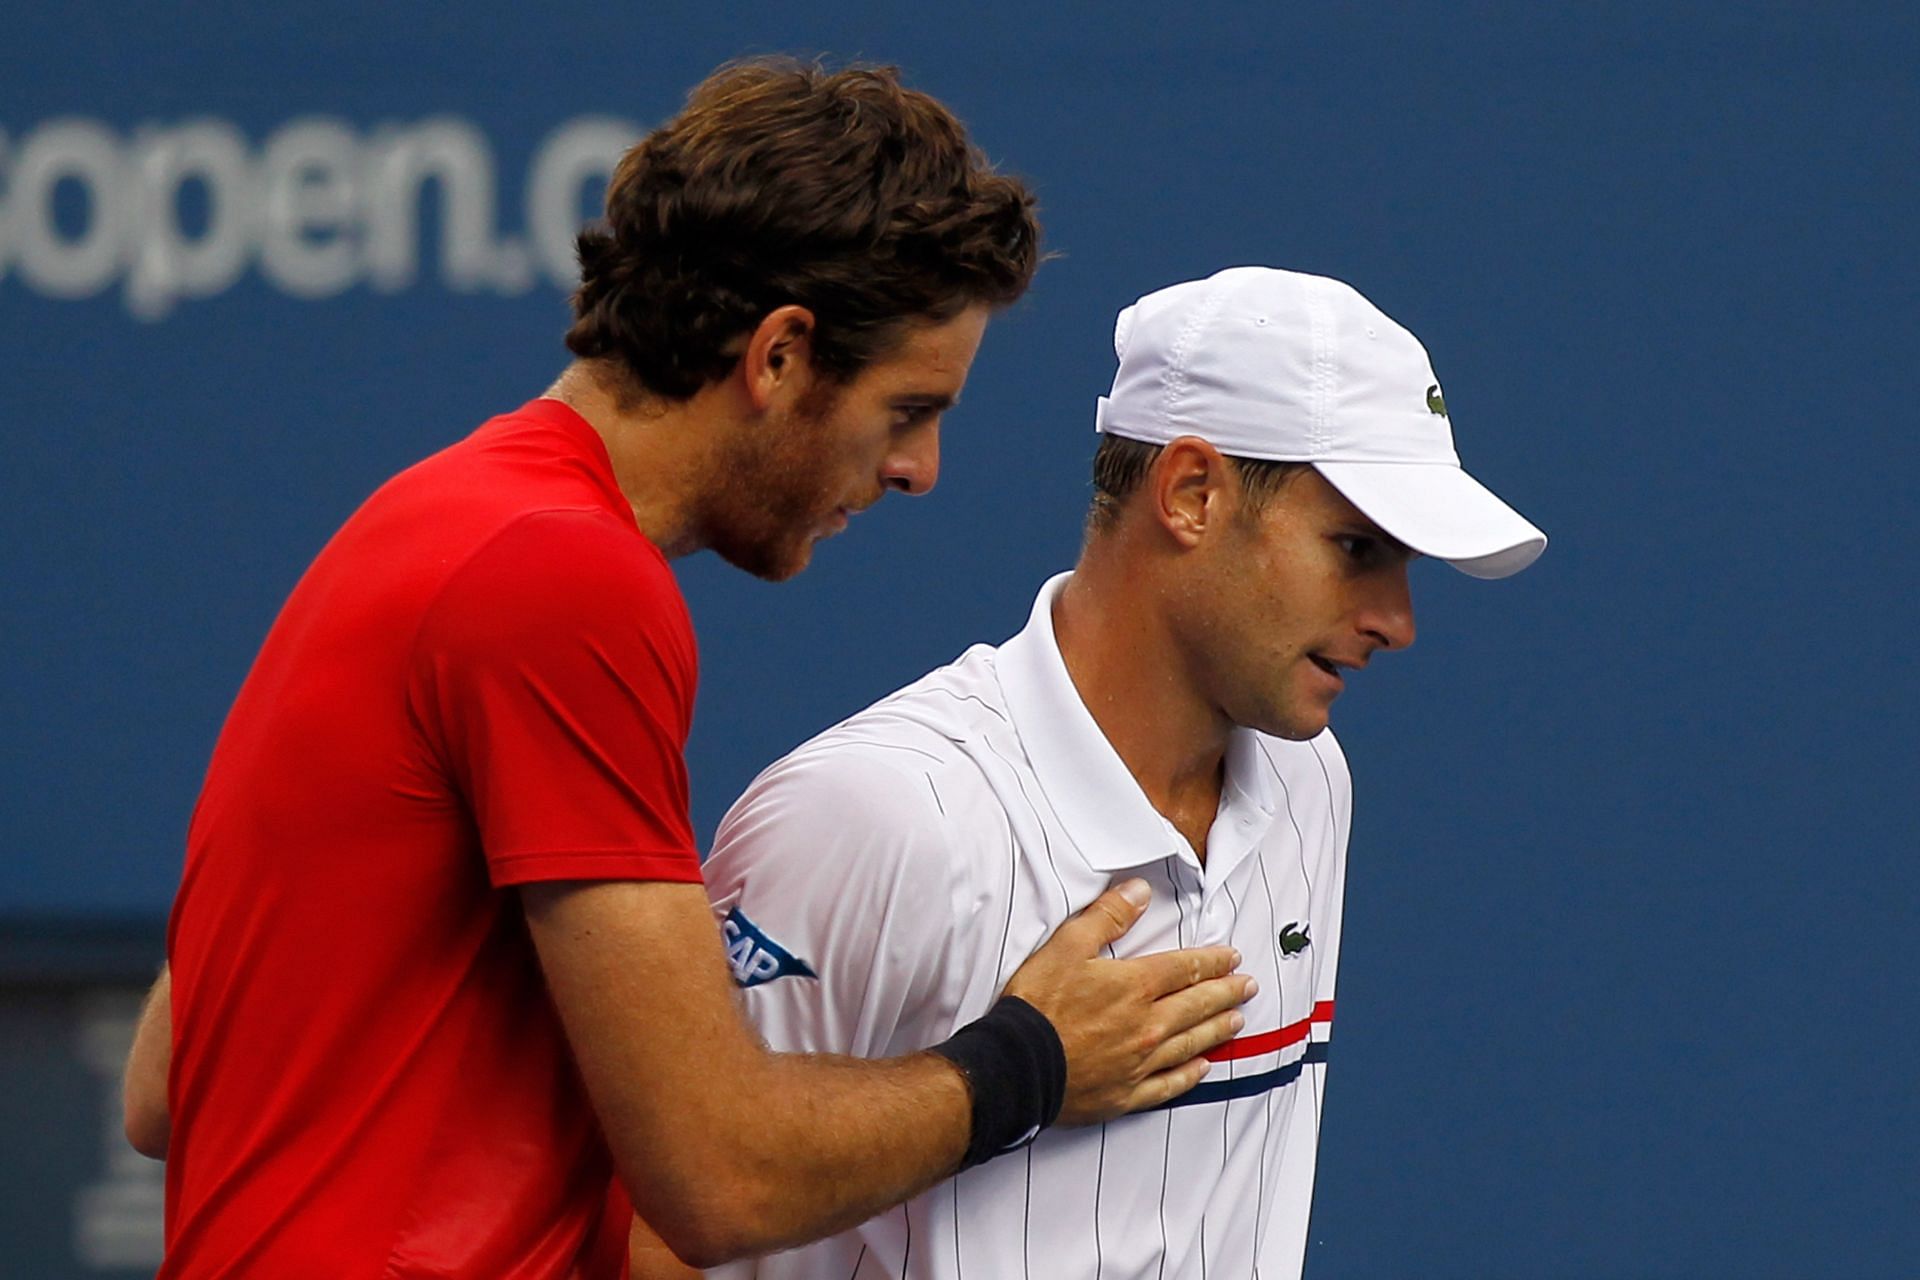 Andy Roddick and Juan Martin Del Potro after their match at the 2012 US Open.